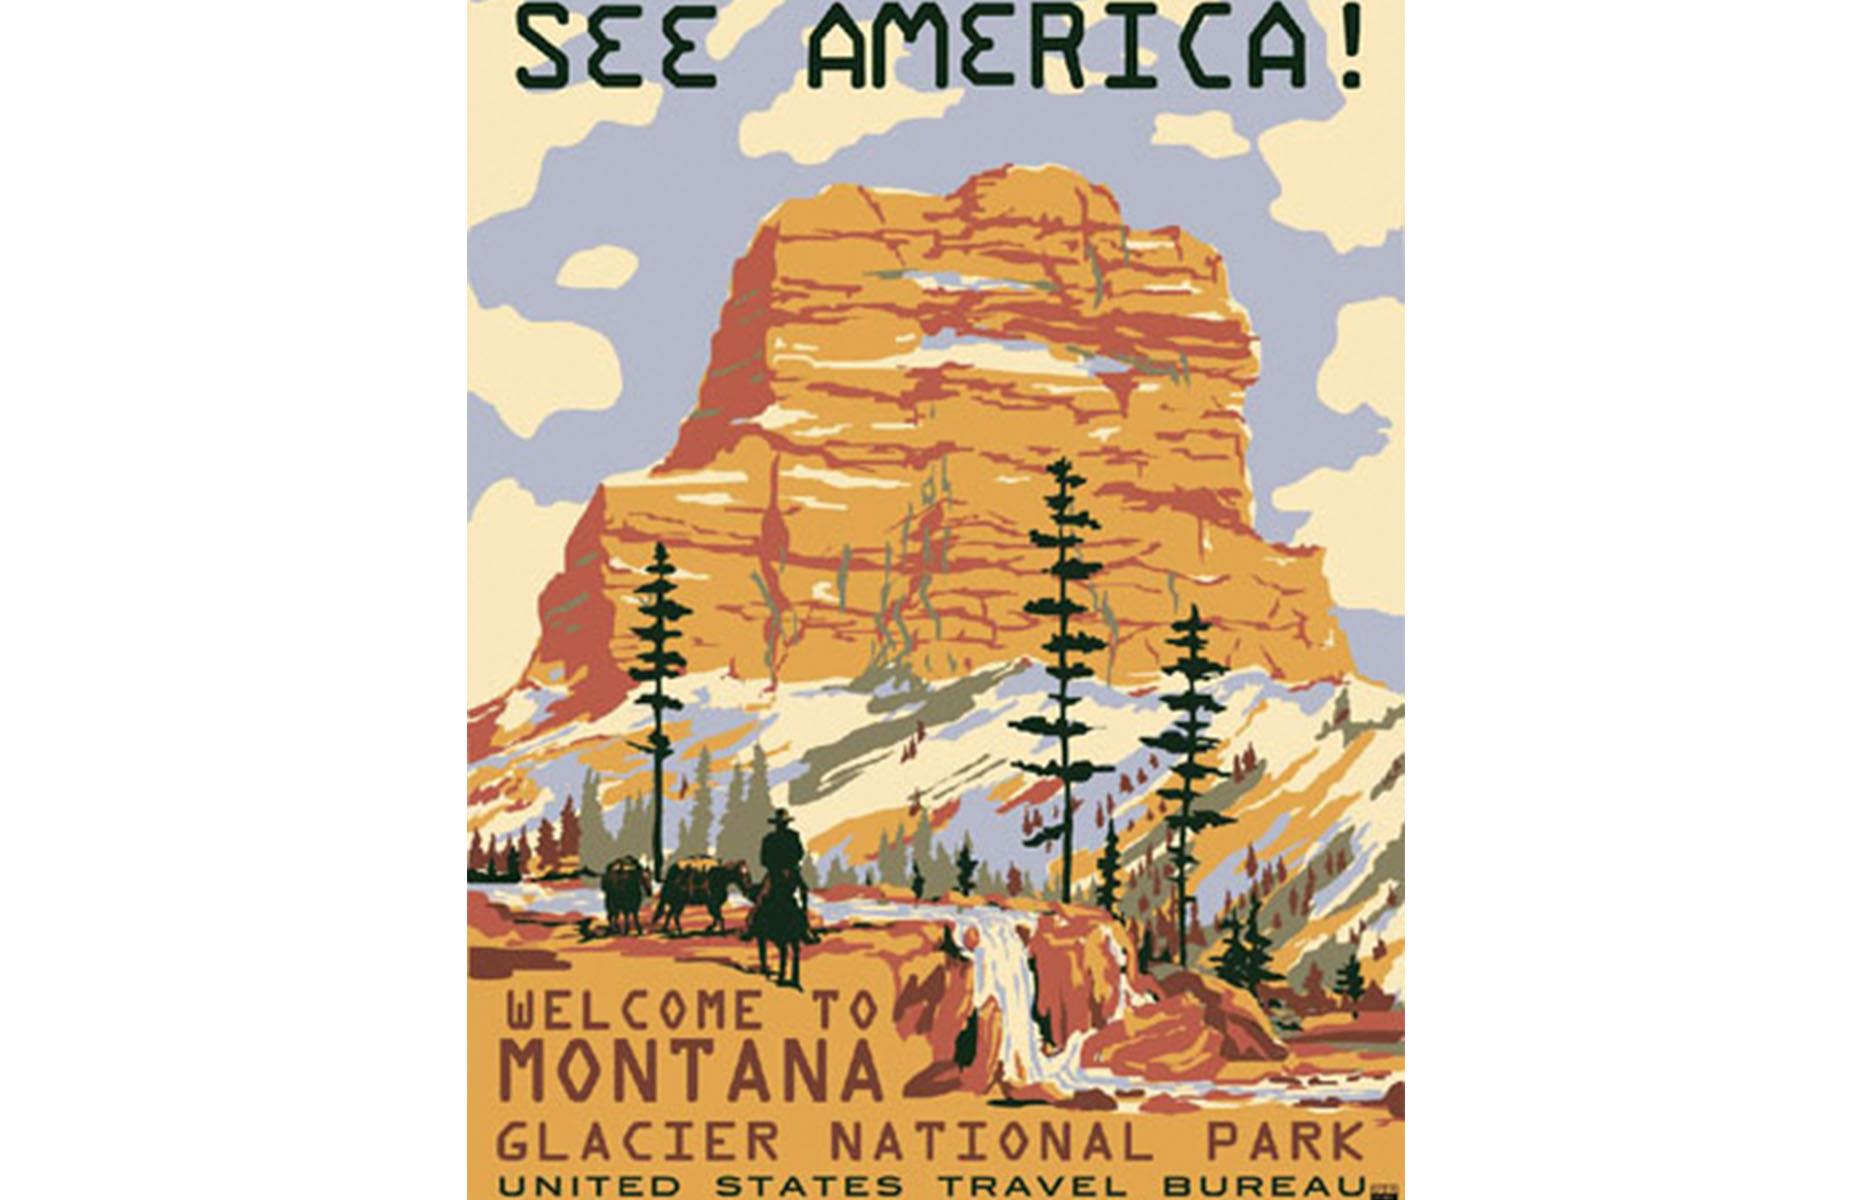 Established in the 1930s, the United States Travel Bureau was tasked with promoting tourism in America. One way it did this was by drawing up gorgeous travel adverts depicting America's backyard. Here Chief Mountain rises up majestically at the edge of Montana's Glacier National Park.